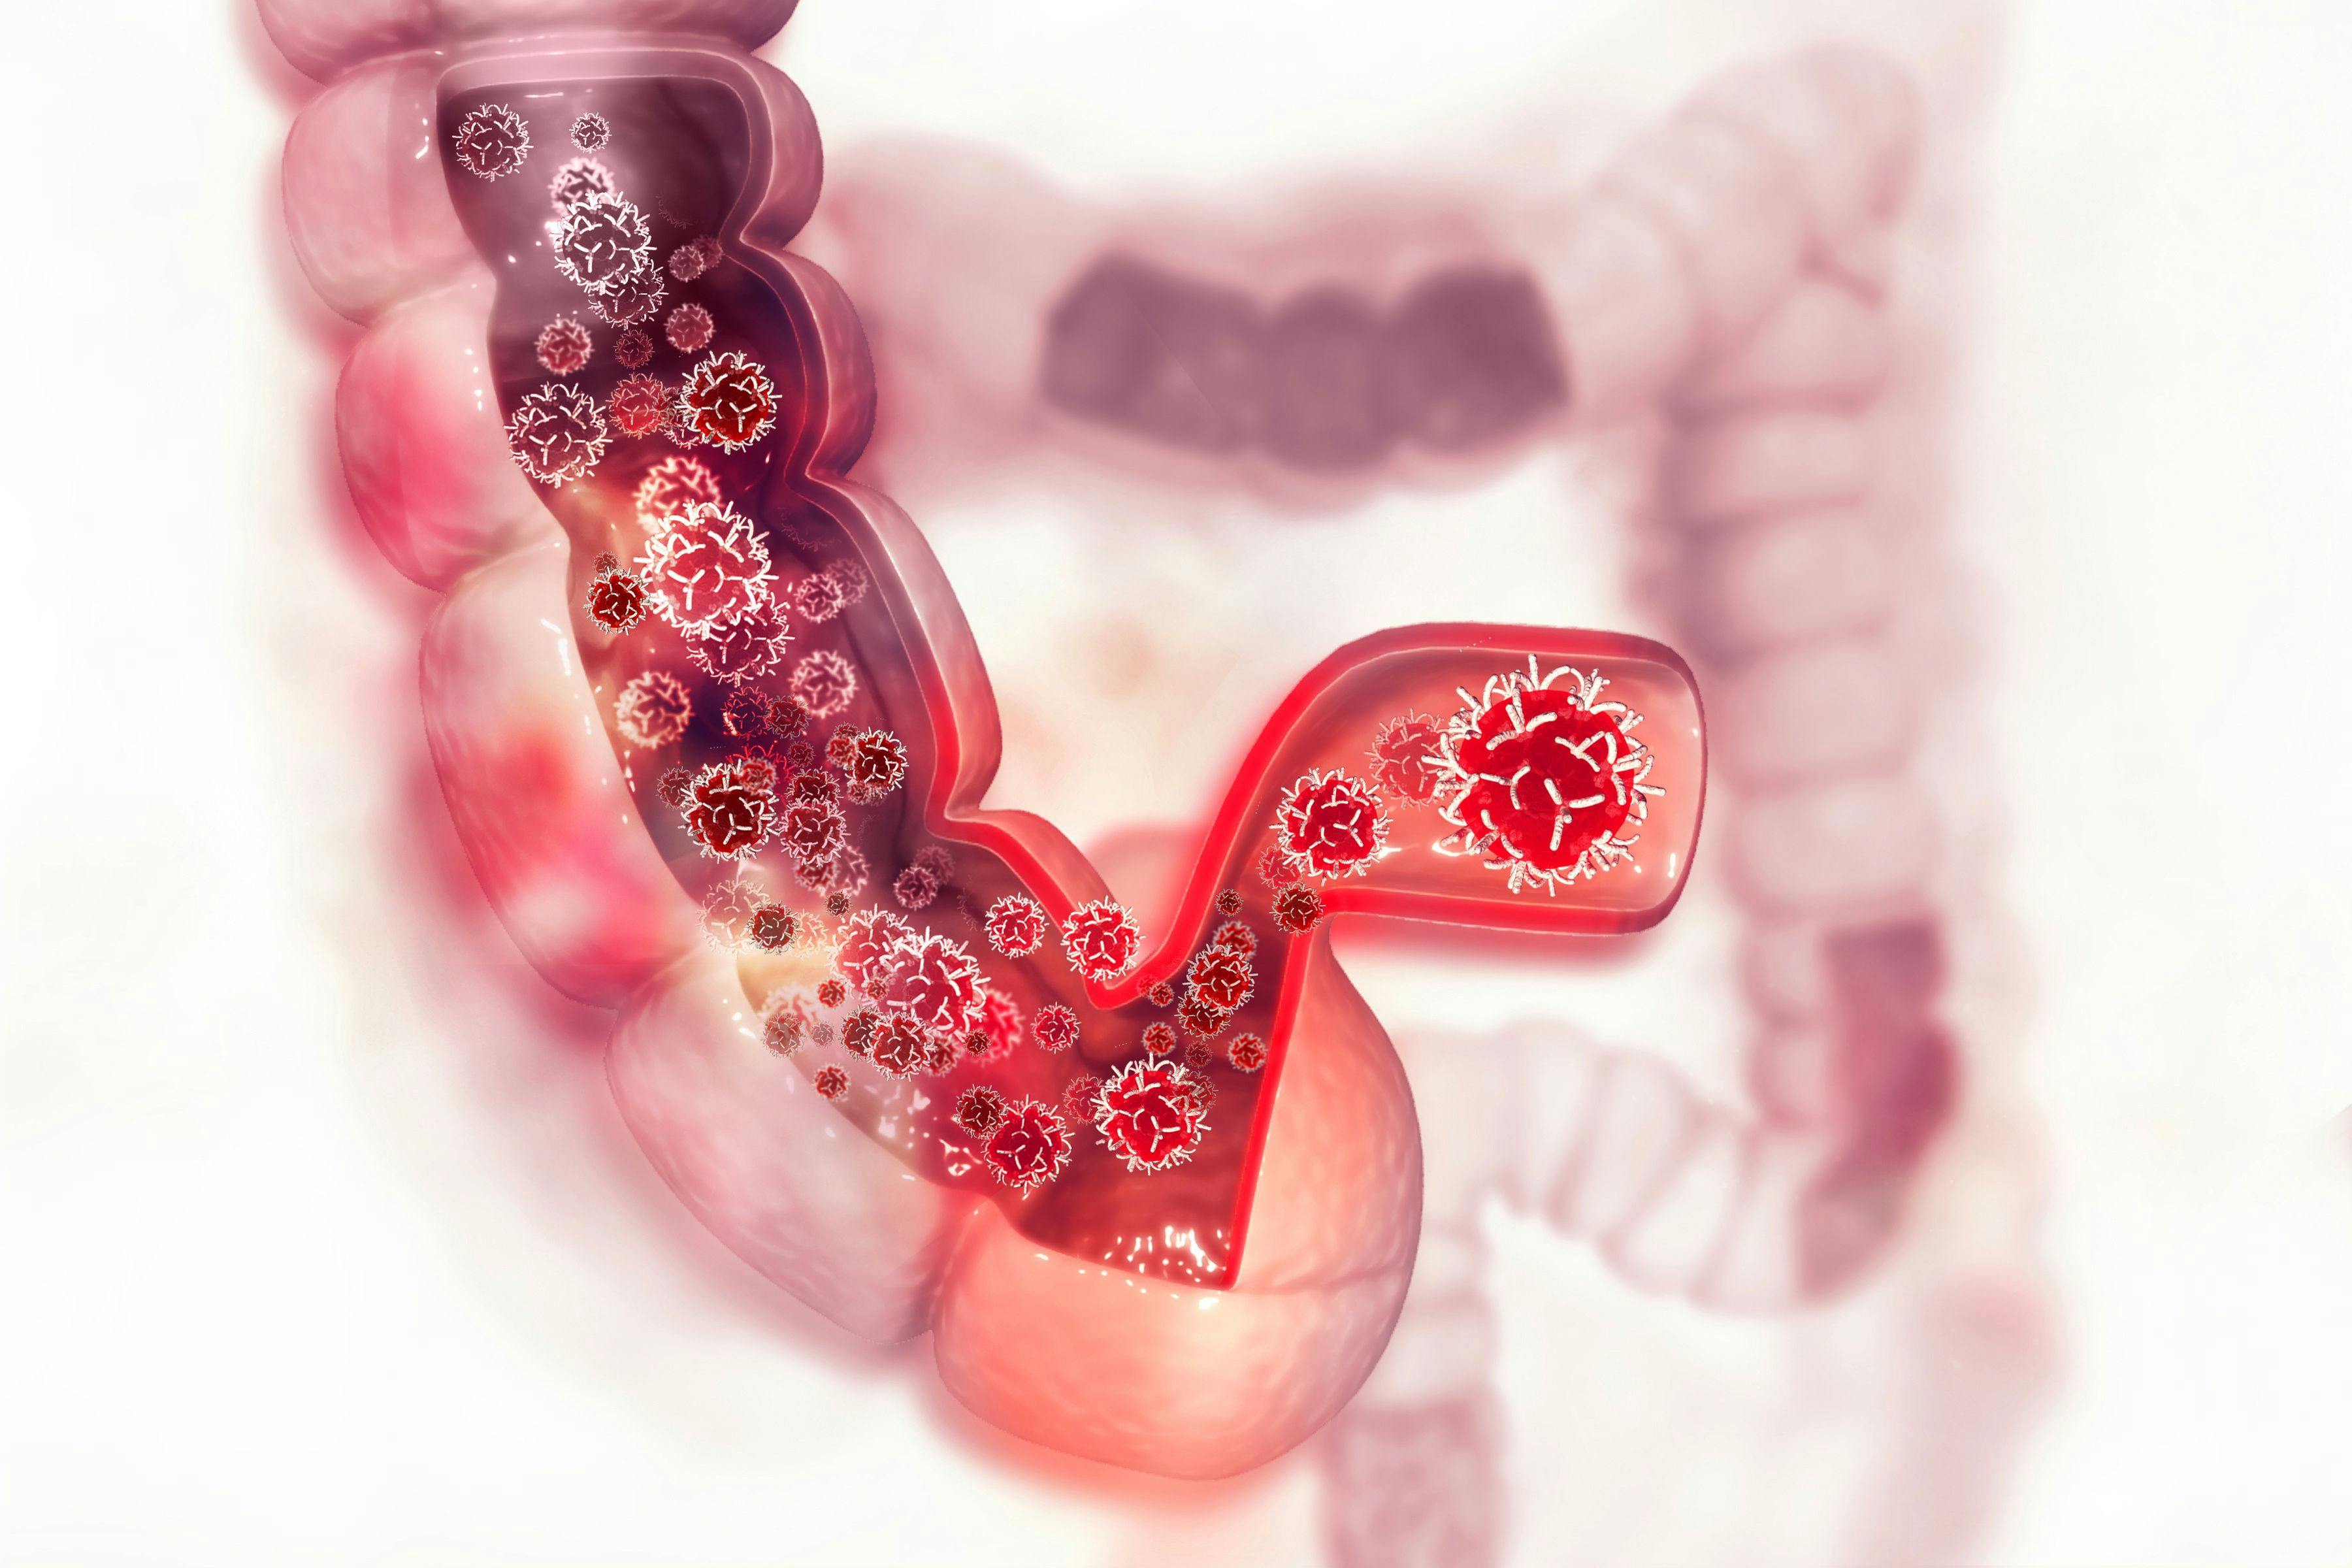 Colon cancer. Cancer attacking cell. Colon disease concept | Image Credit: © Crystal light - stock.adobe.com